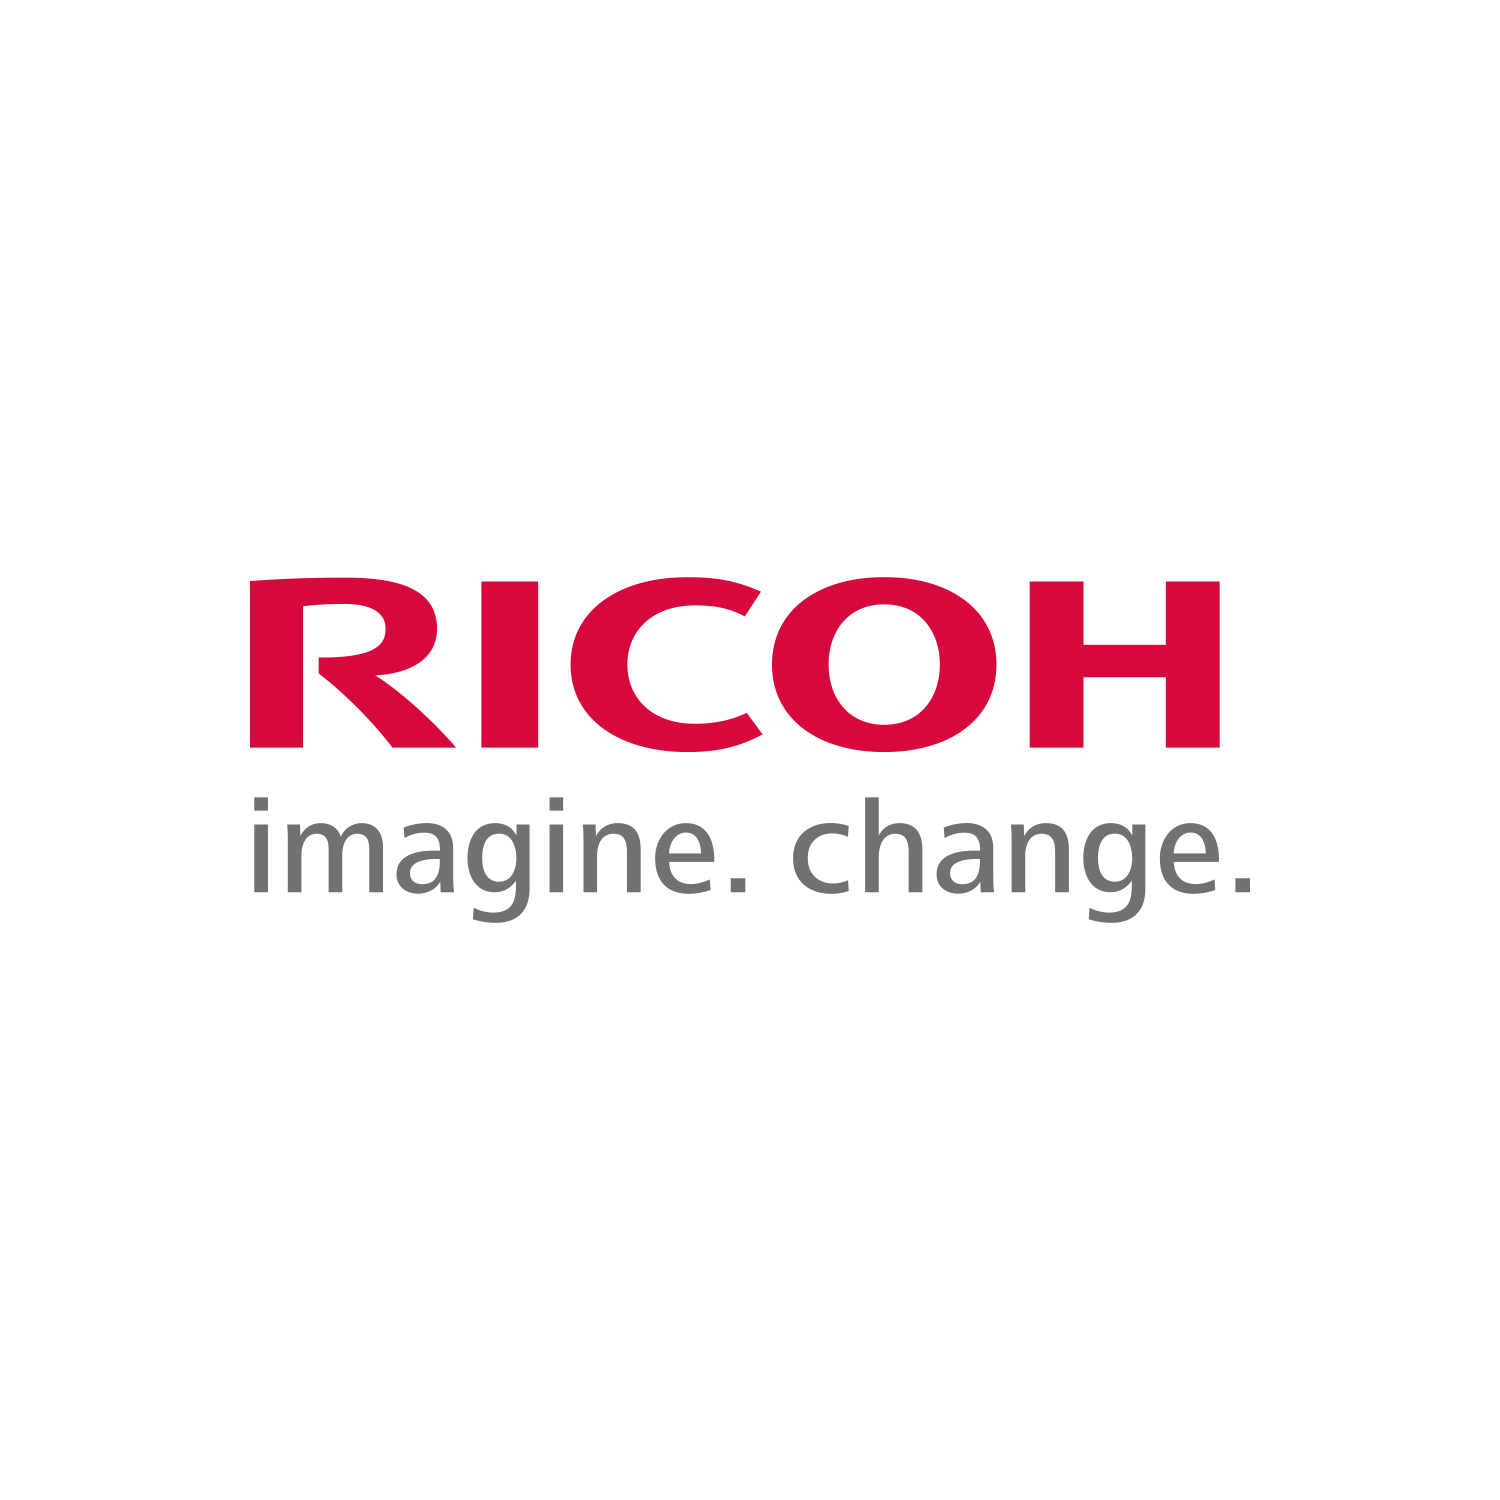 Ricoh Us Logo - Ricoh Global | EMPOWERING DIGITAL WORKPLACES